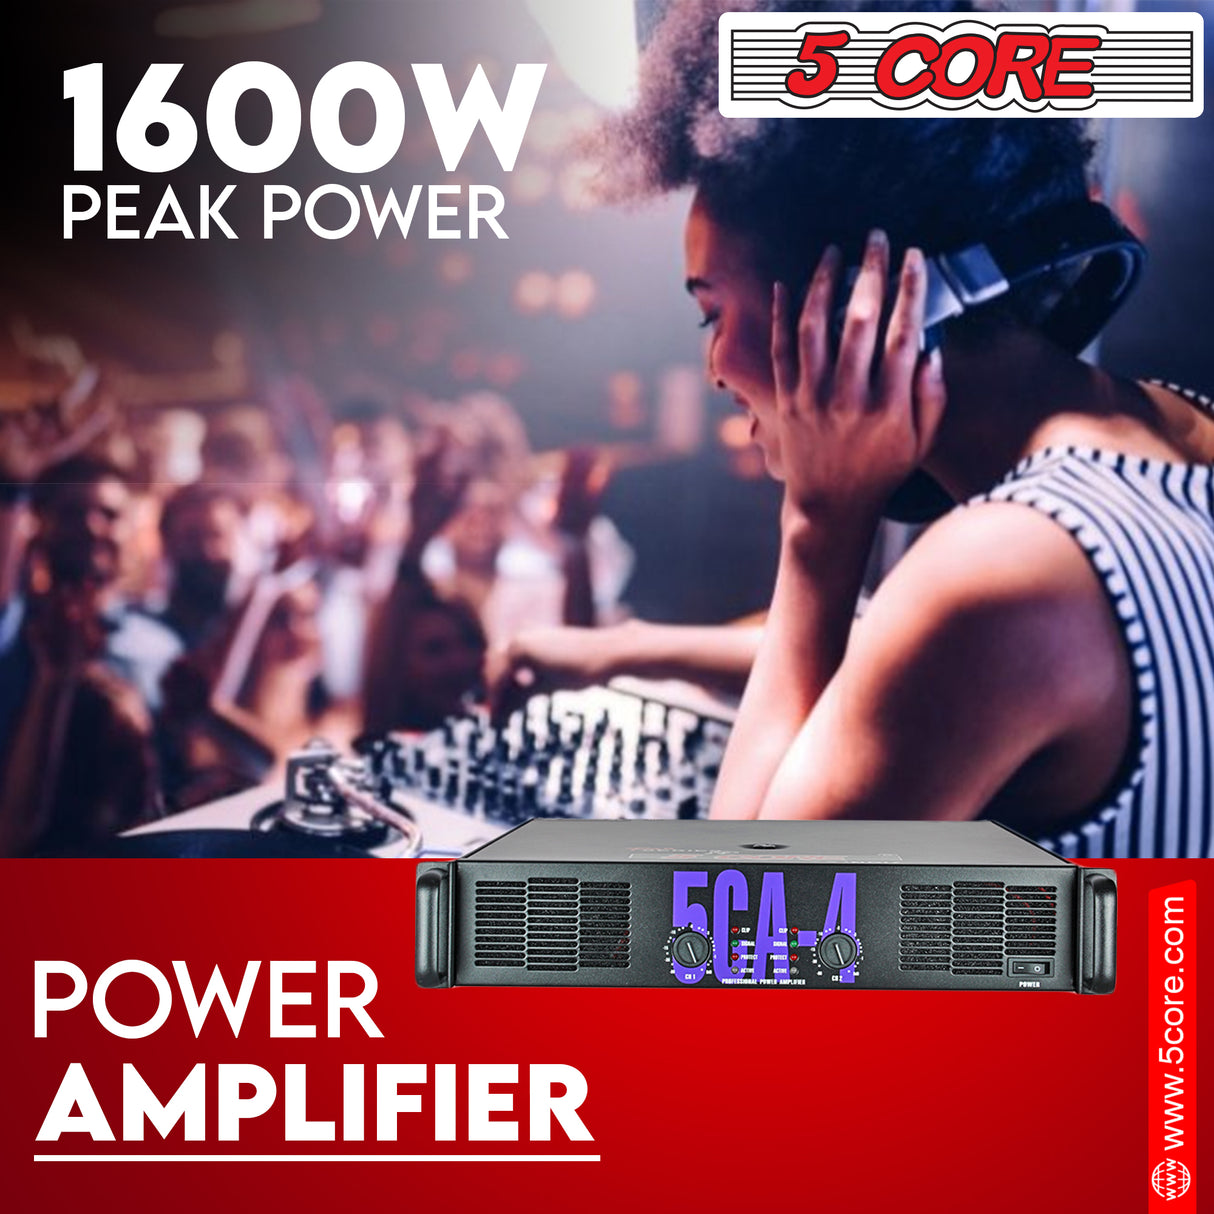 5 Core Power Amplifier – 1600W Peak Output Amplifier for Experts and DJ, Professional 2U Chassis High Powered AMP with XLR Input, Master Volume Controller- CA 4